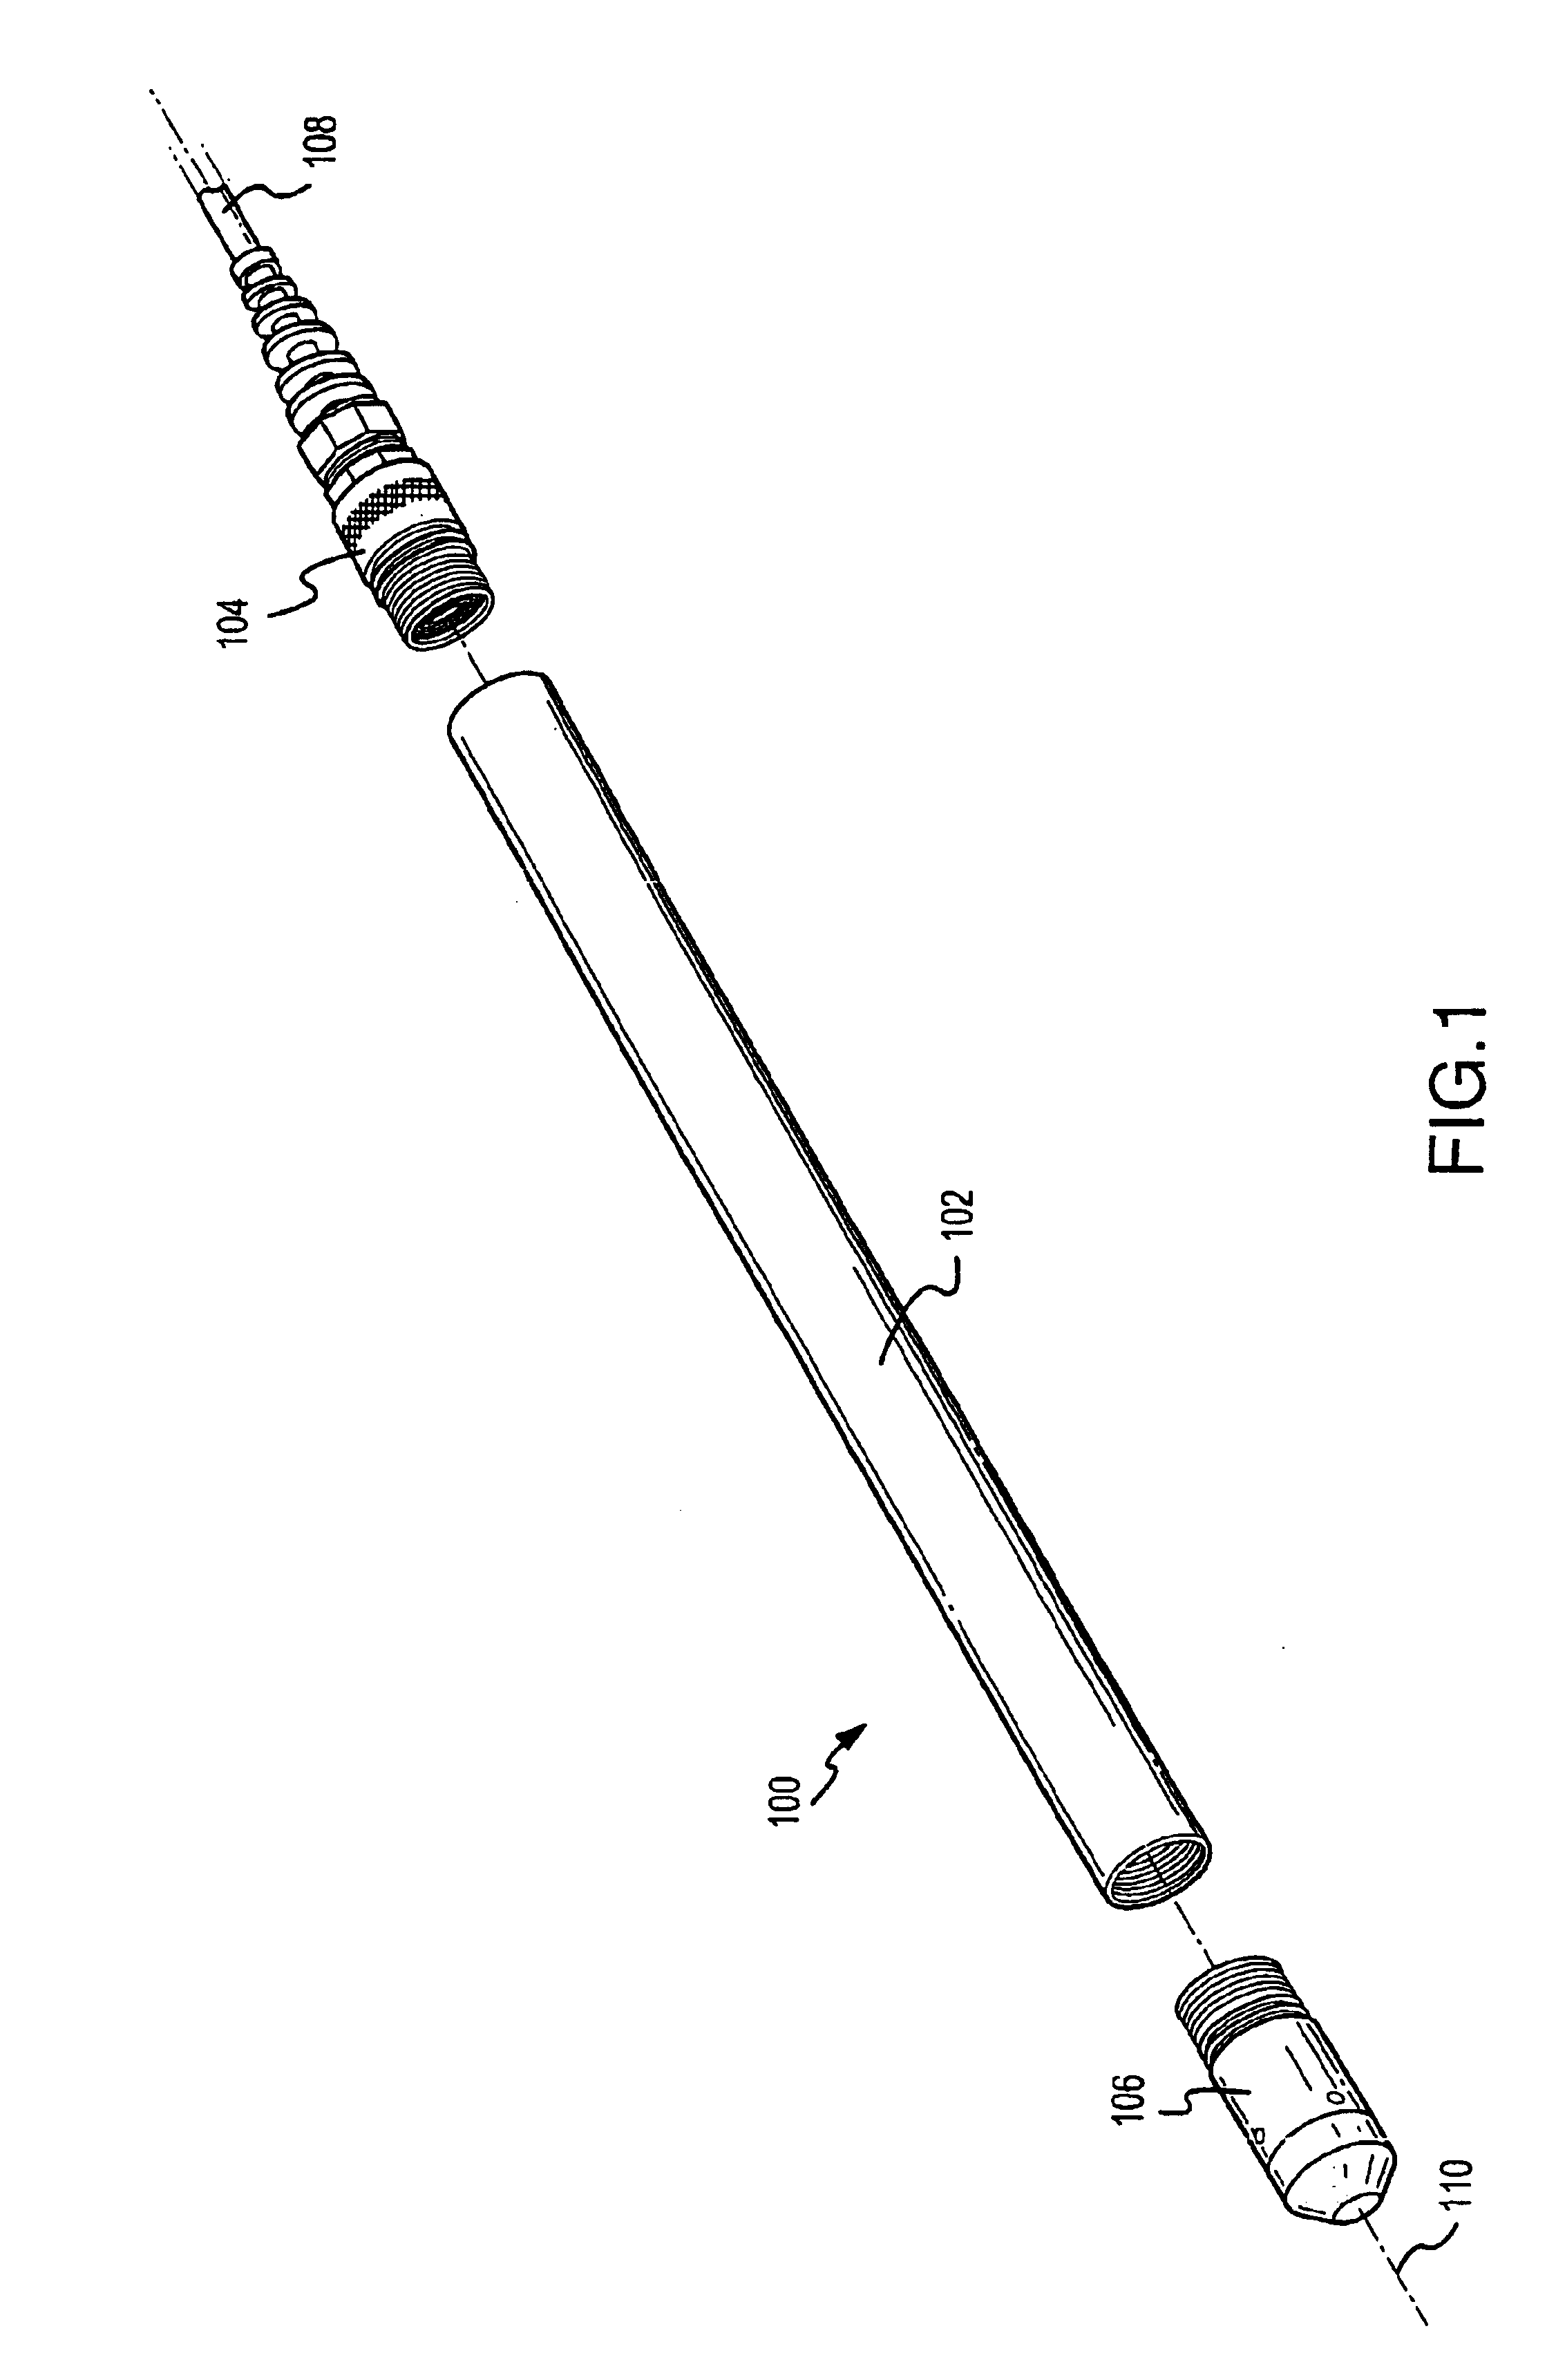 Tool assembly and monitoring applications using same